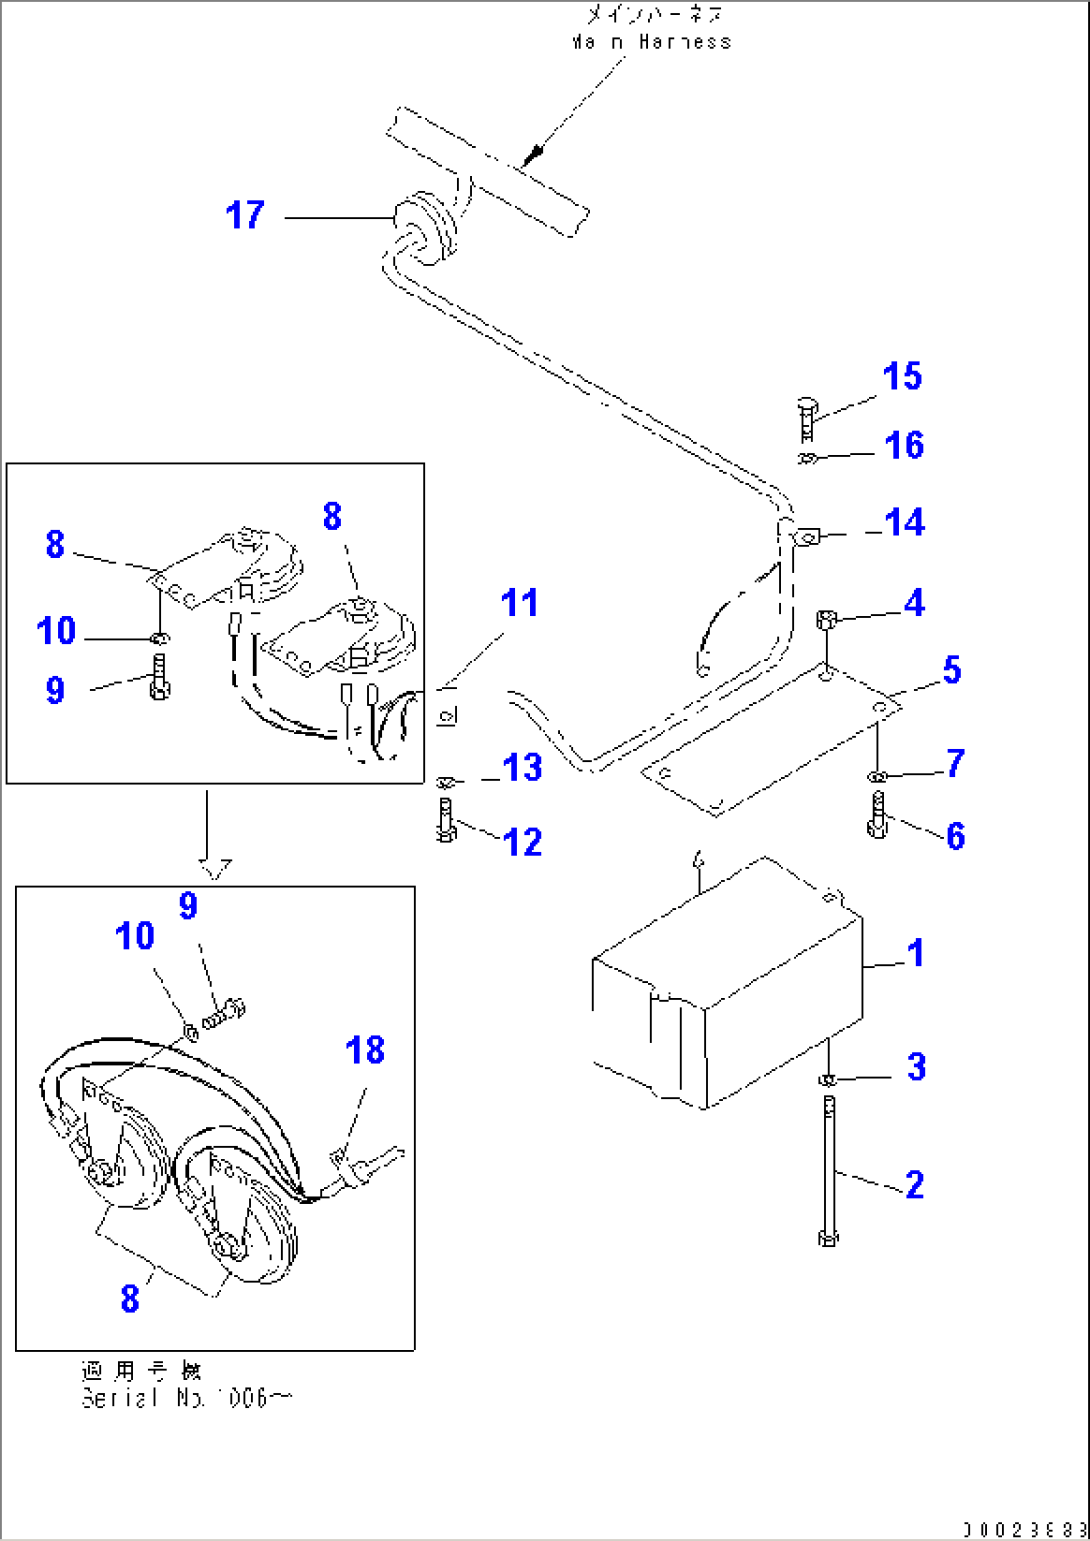 ELECTRICAL SYSTEM (HORN)